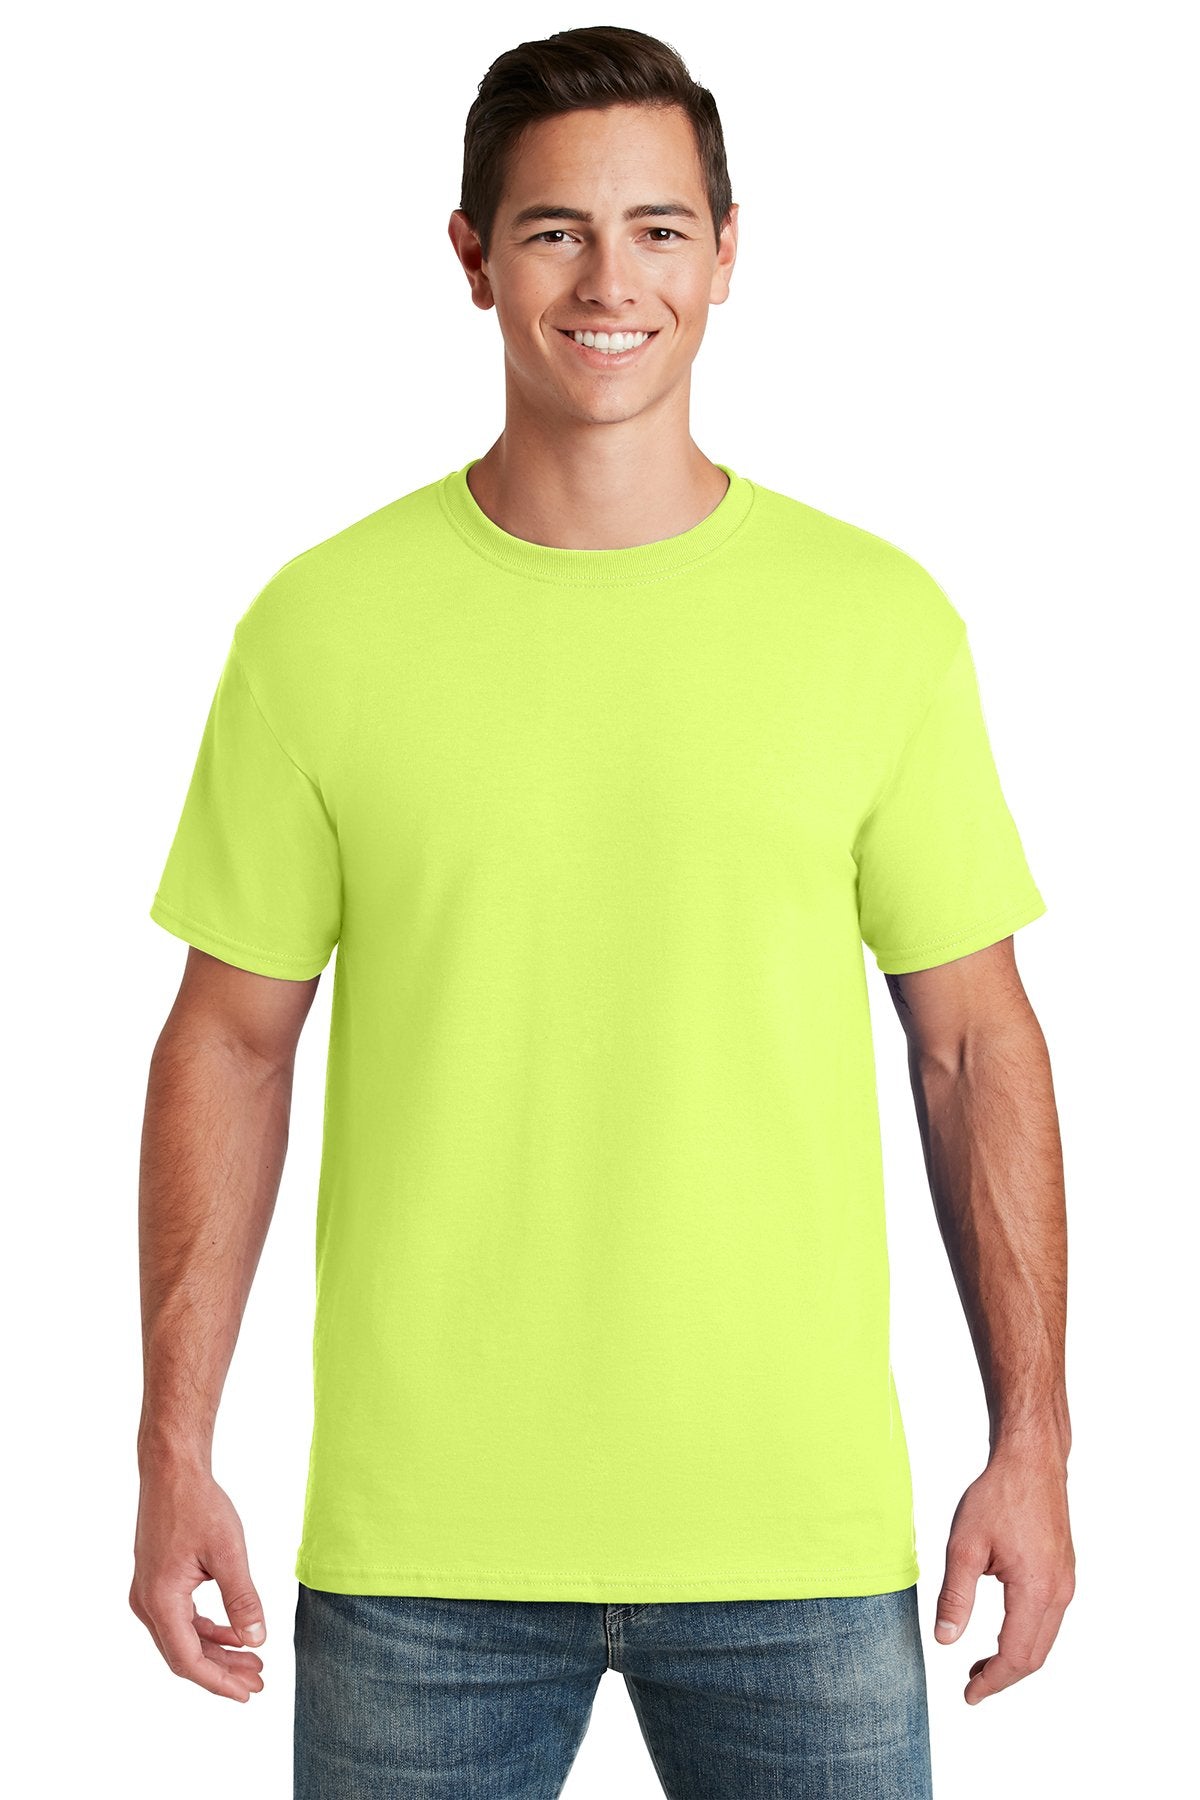 jerzees dri-power active 50/50 cotton/poly t-shirt 29m safety green